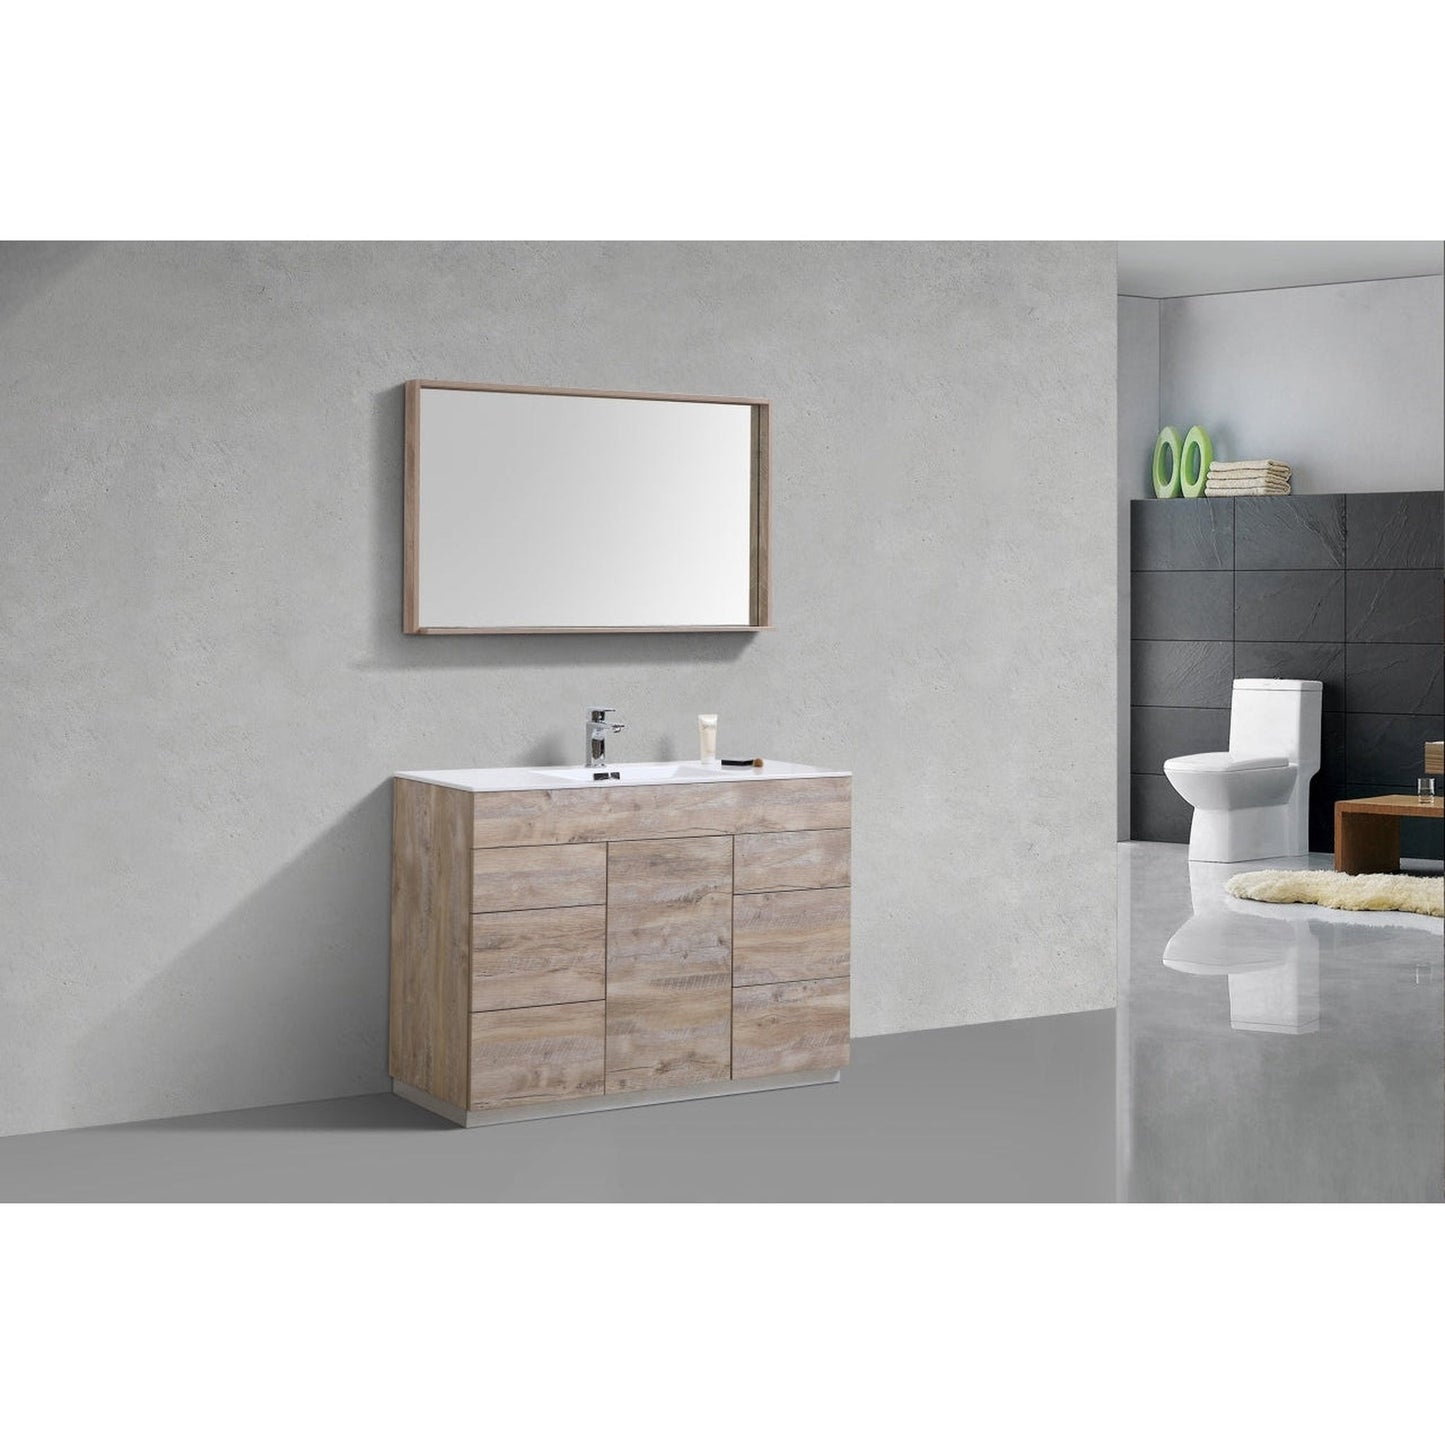 KubeBath Milano 48" Nature Wood Freestanding Modern Bathroom Vanity With Single Integrated Acrylic Sink With Overflow and 48" Wood Framed Mirror With Shelf